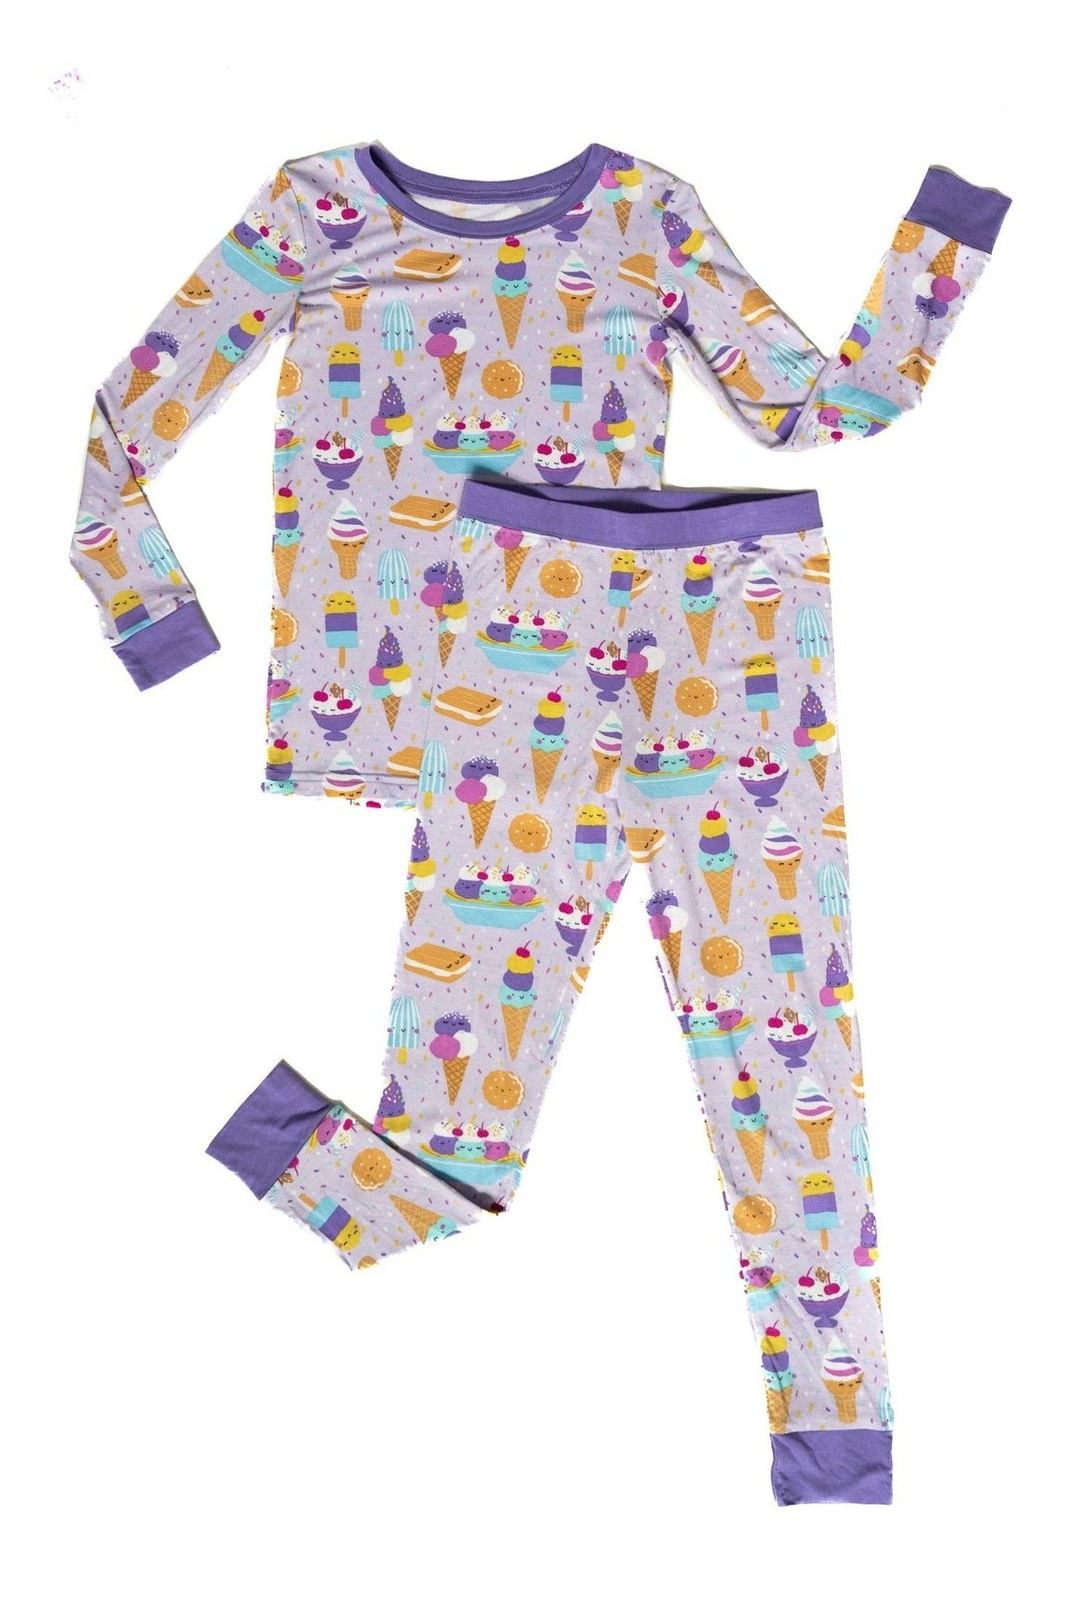 Wildberry Ice Cream Social Two-Piece Bamboo Viscose Pajama Set Tea for Three: A Children's Boutique